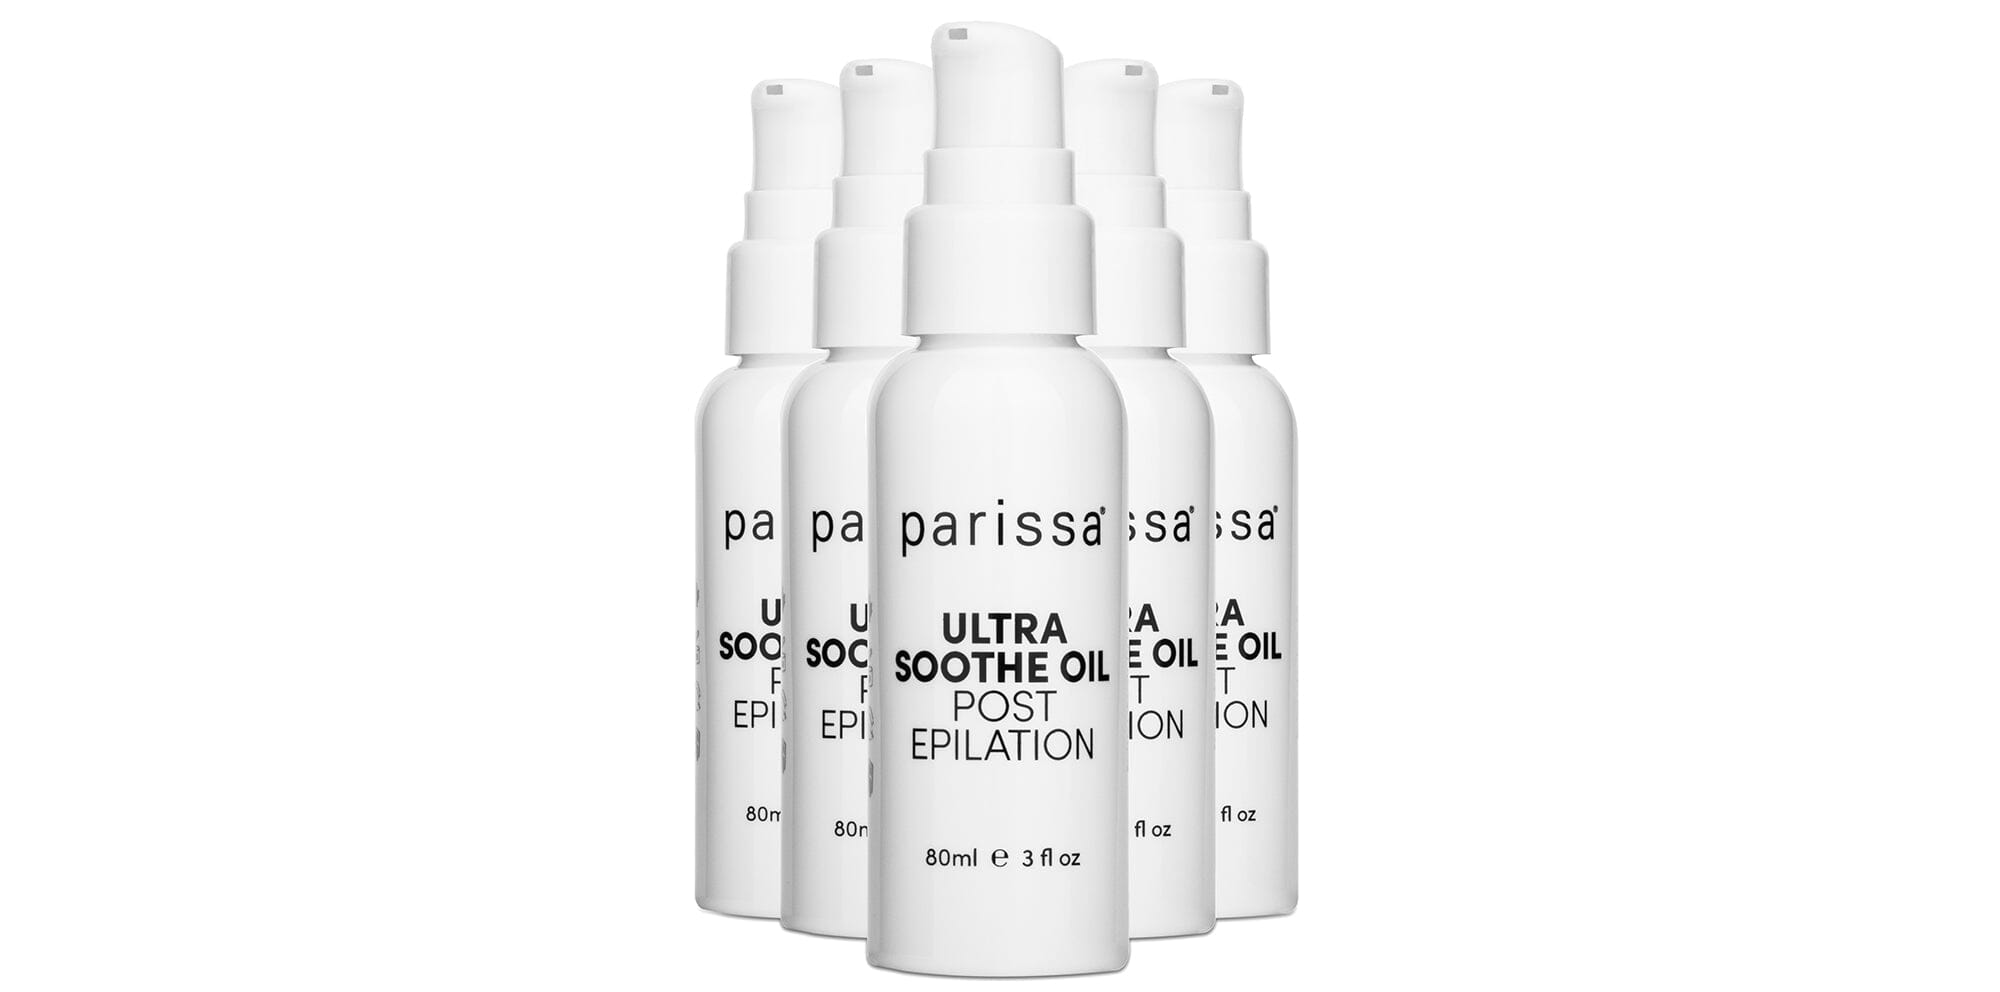 6 Benefits of the Parissa Ultra Soothe Oil